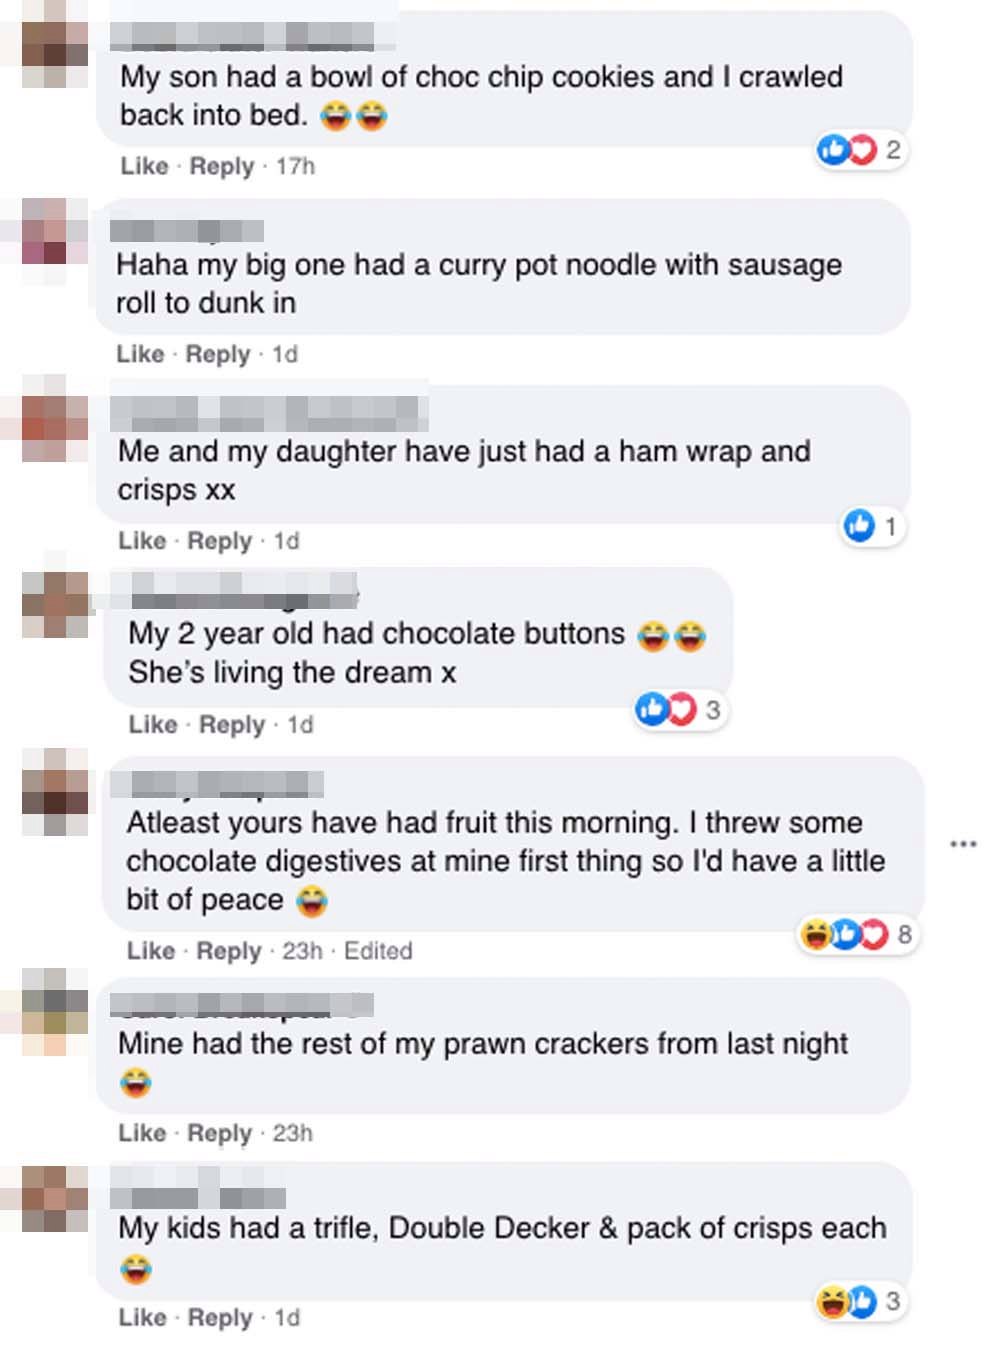 Other parents shared what they fed their own kids